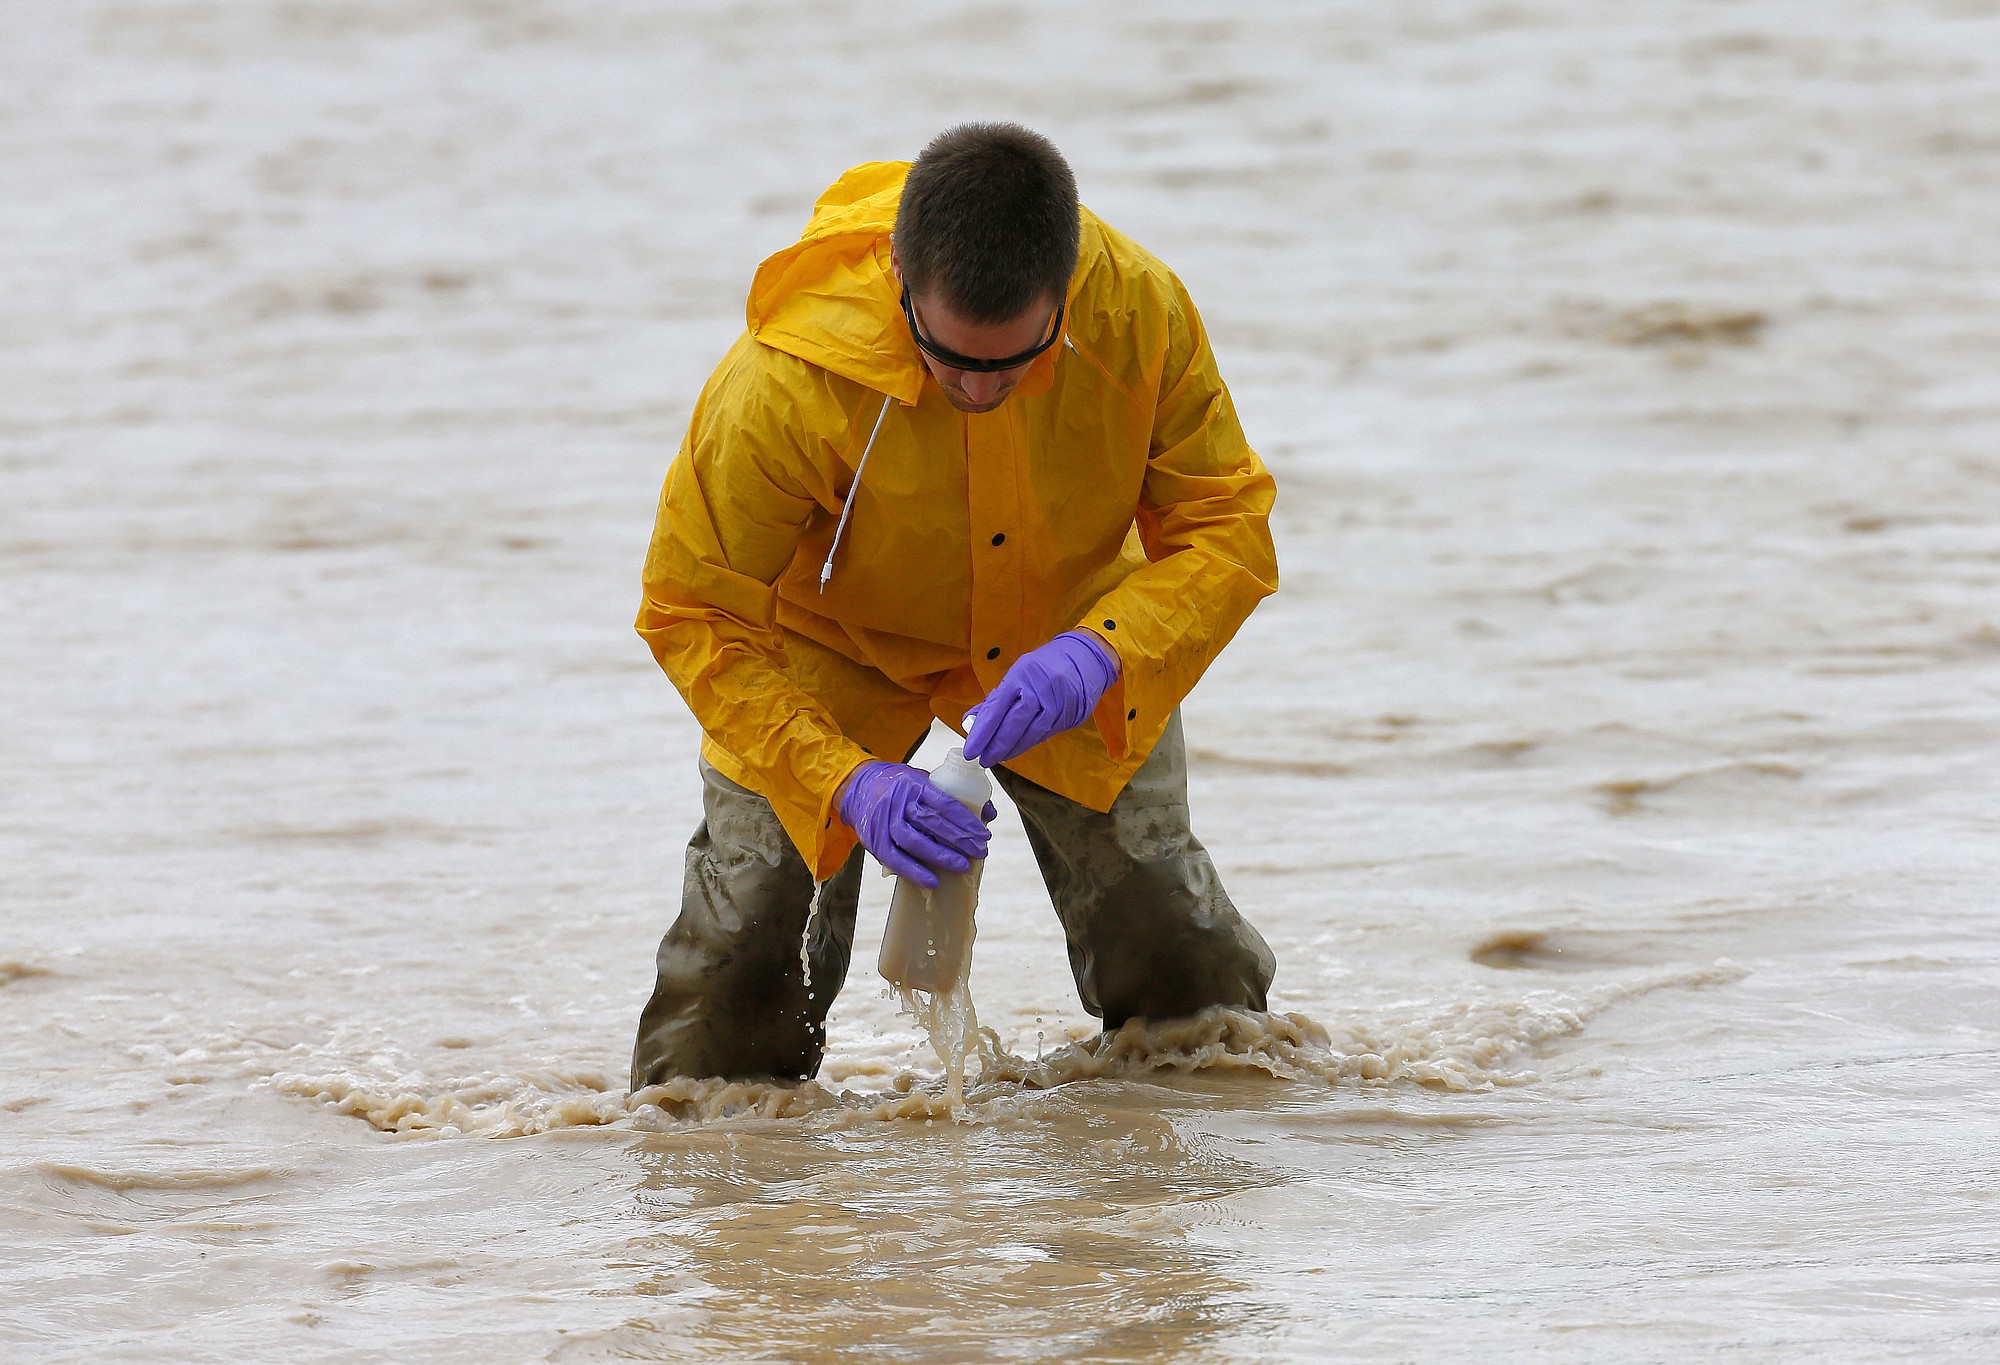 Hydrologic Technician Ryan Parker gathers water samples from the San Juan River, Tuesday, Aug. 11, 2015, in Montezuma Creek, Utah. A spill containing lead and arsenic from the abandoned Gold King Mine in Silverton, Colo., leaked into the Animas River, which flows into the San Juan River in southern Utah, on Aug. 5. The spill was caused by a mining and safety team working for the EPA.